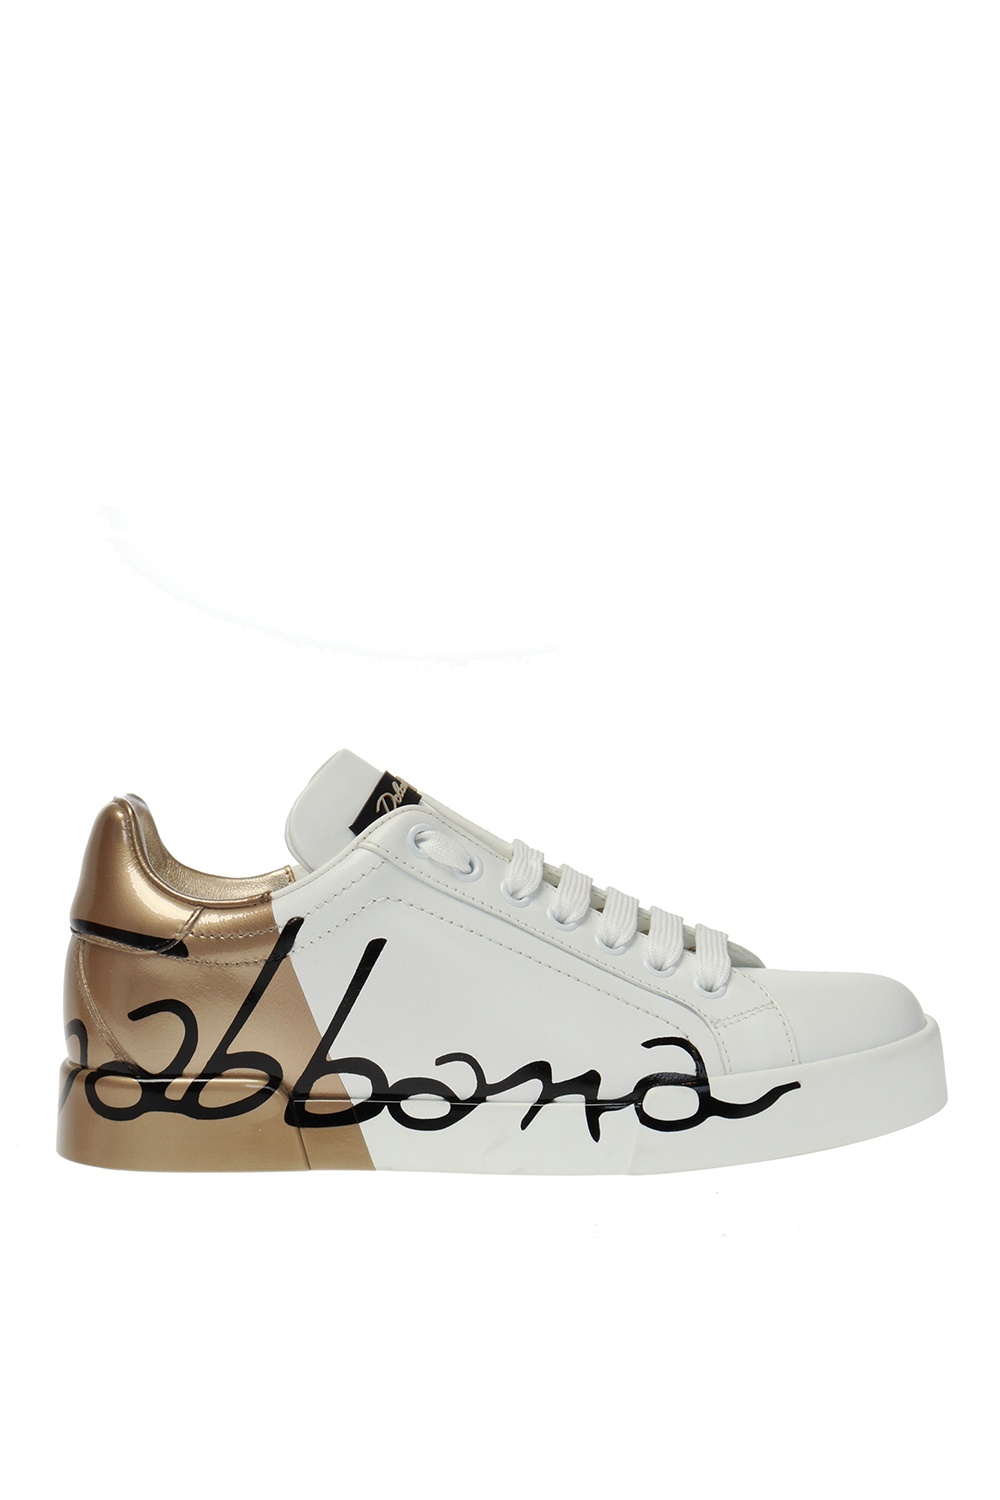 dolce and gabbana sneaker size guide